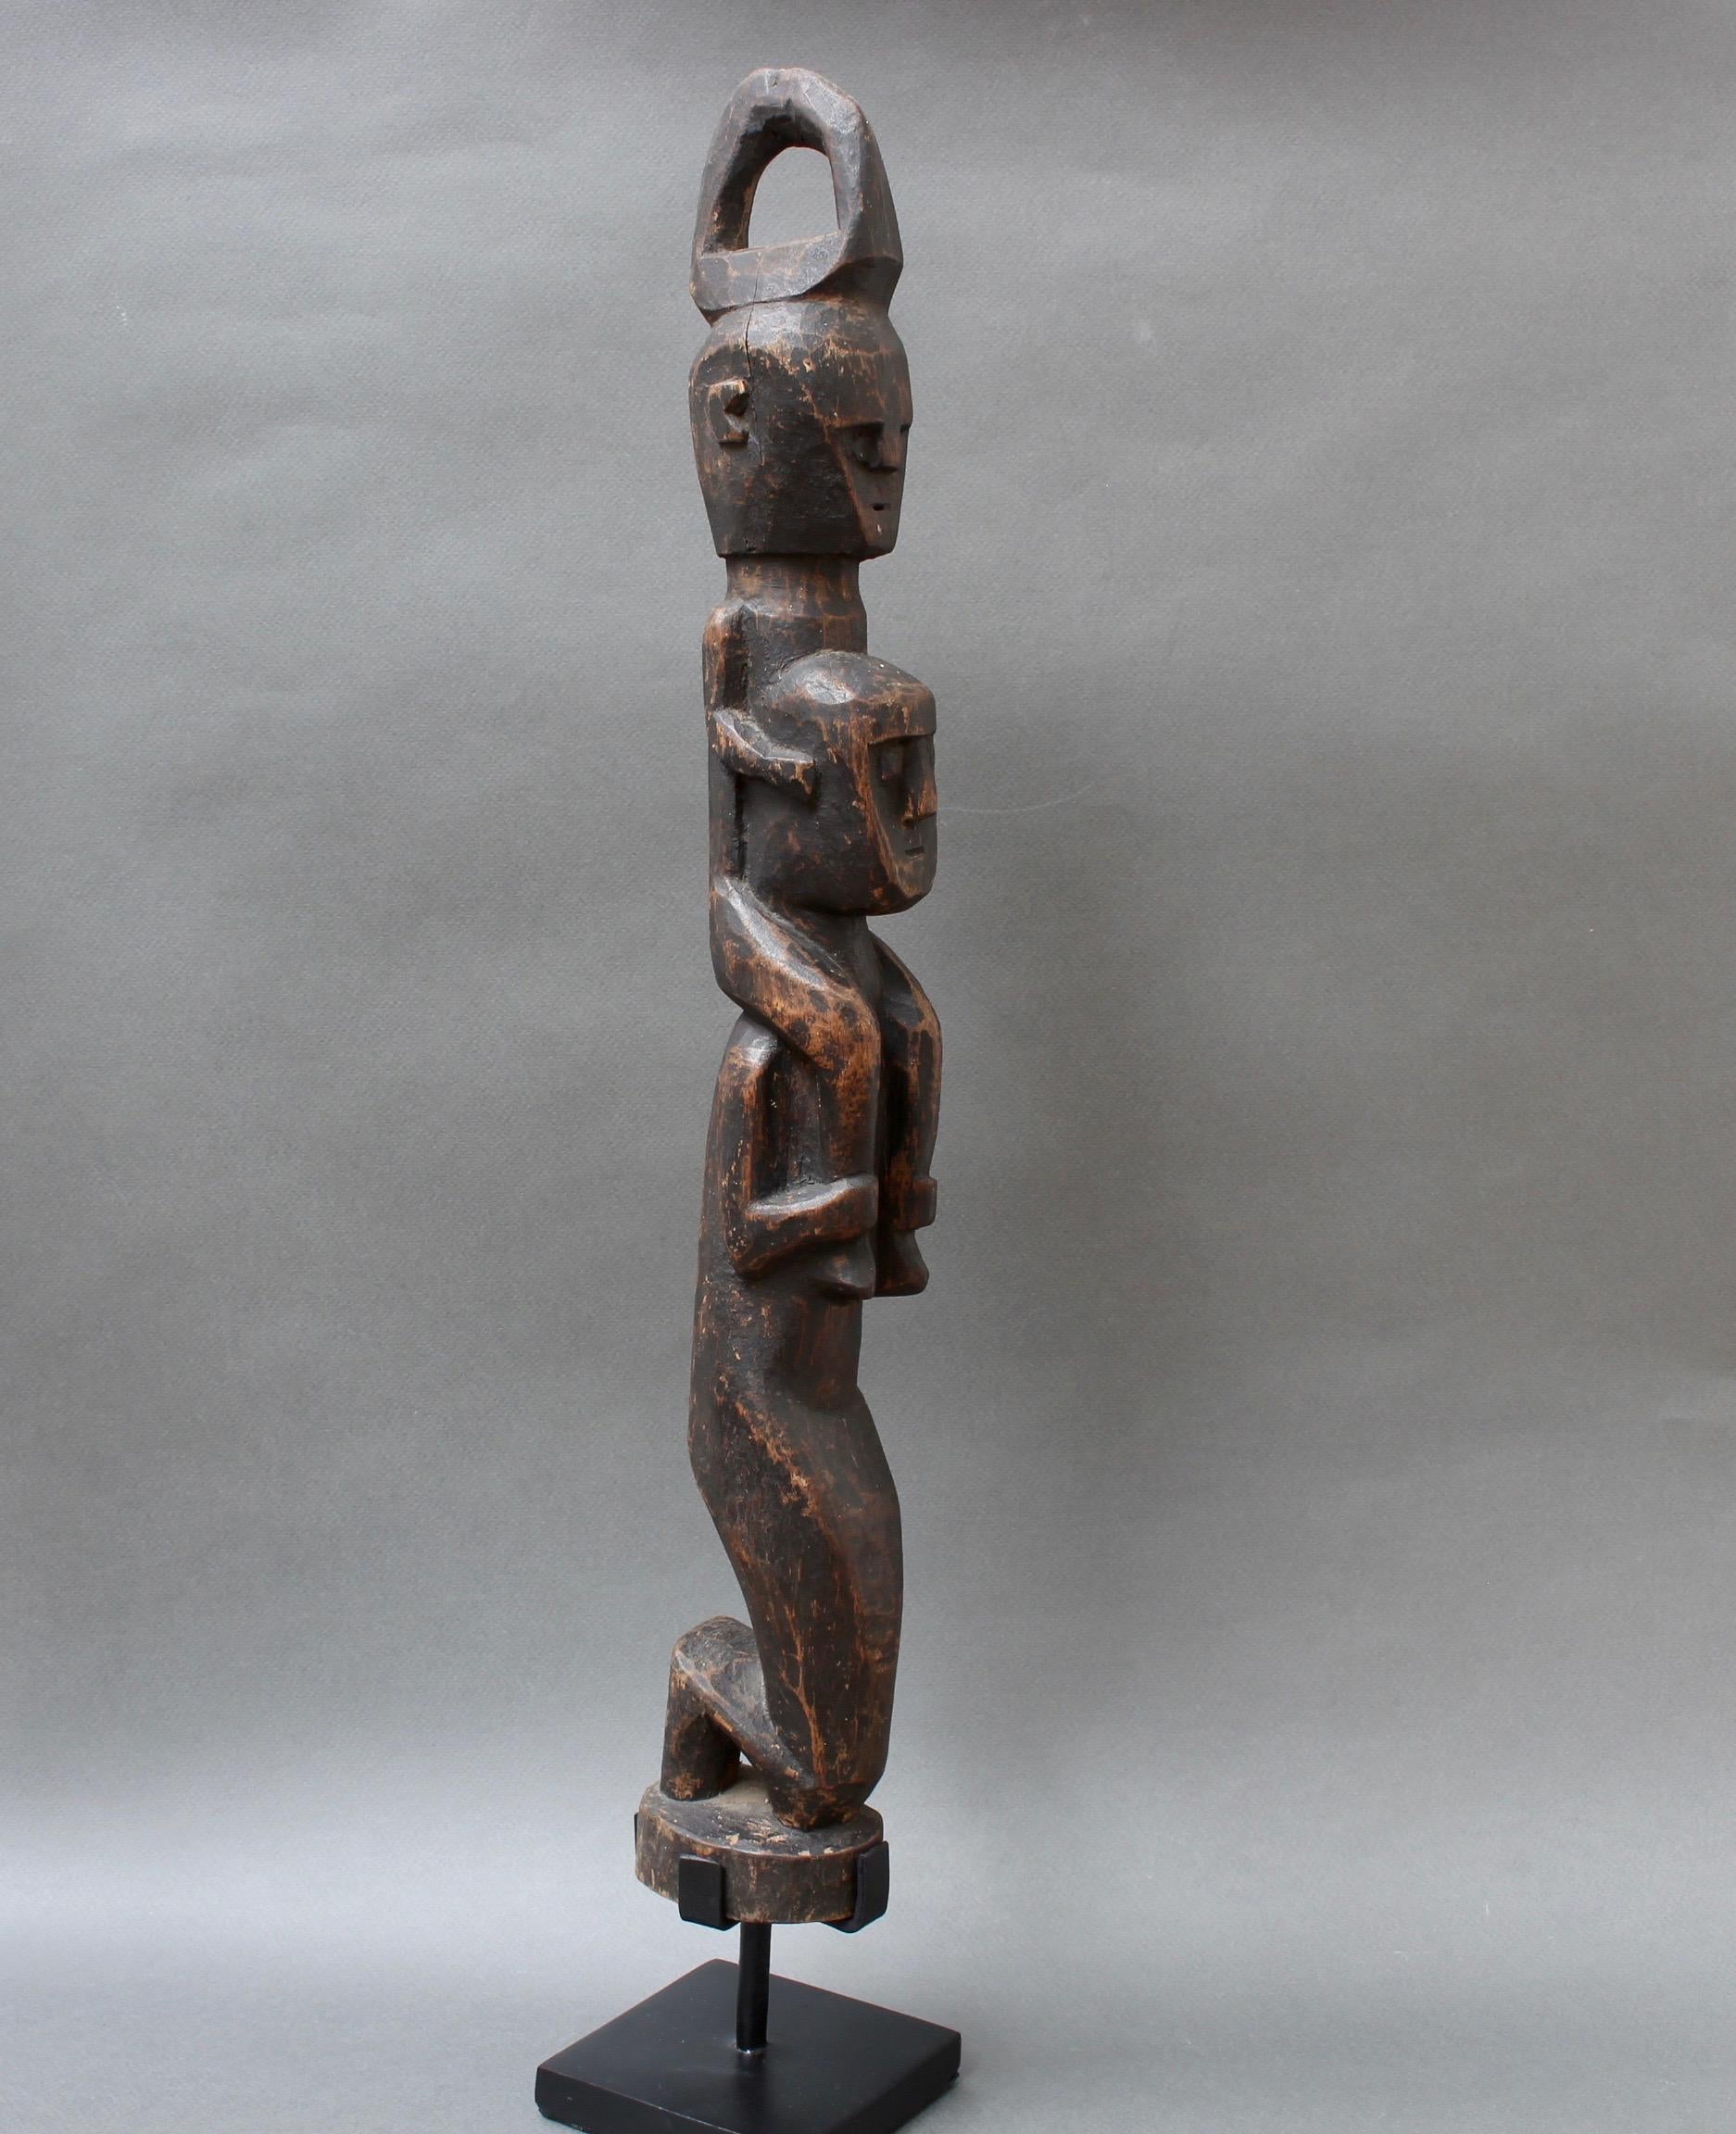 Hand-Carved Wooden Sculpture of Totemic Figures from Timor Island, Indonesia, circa 1970s